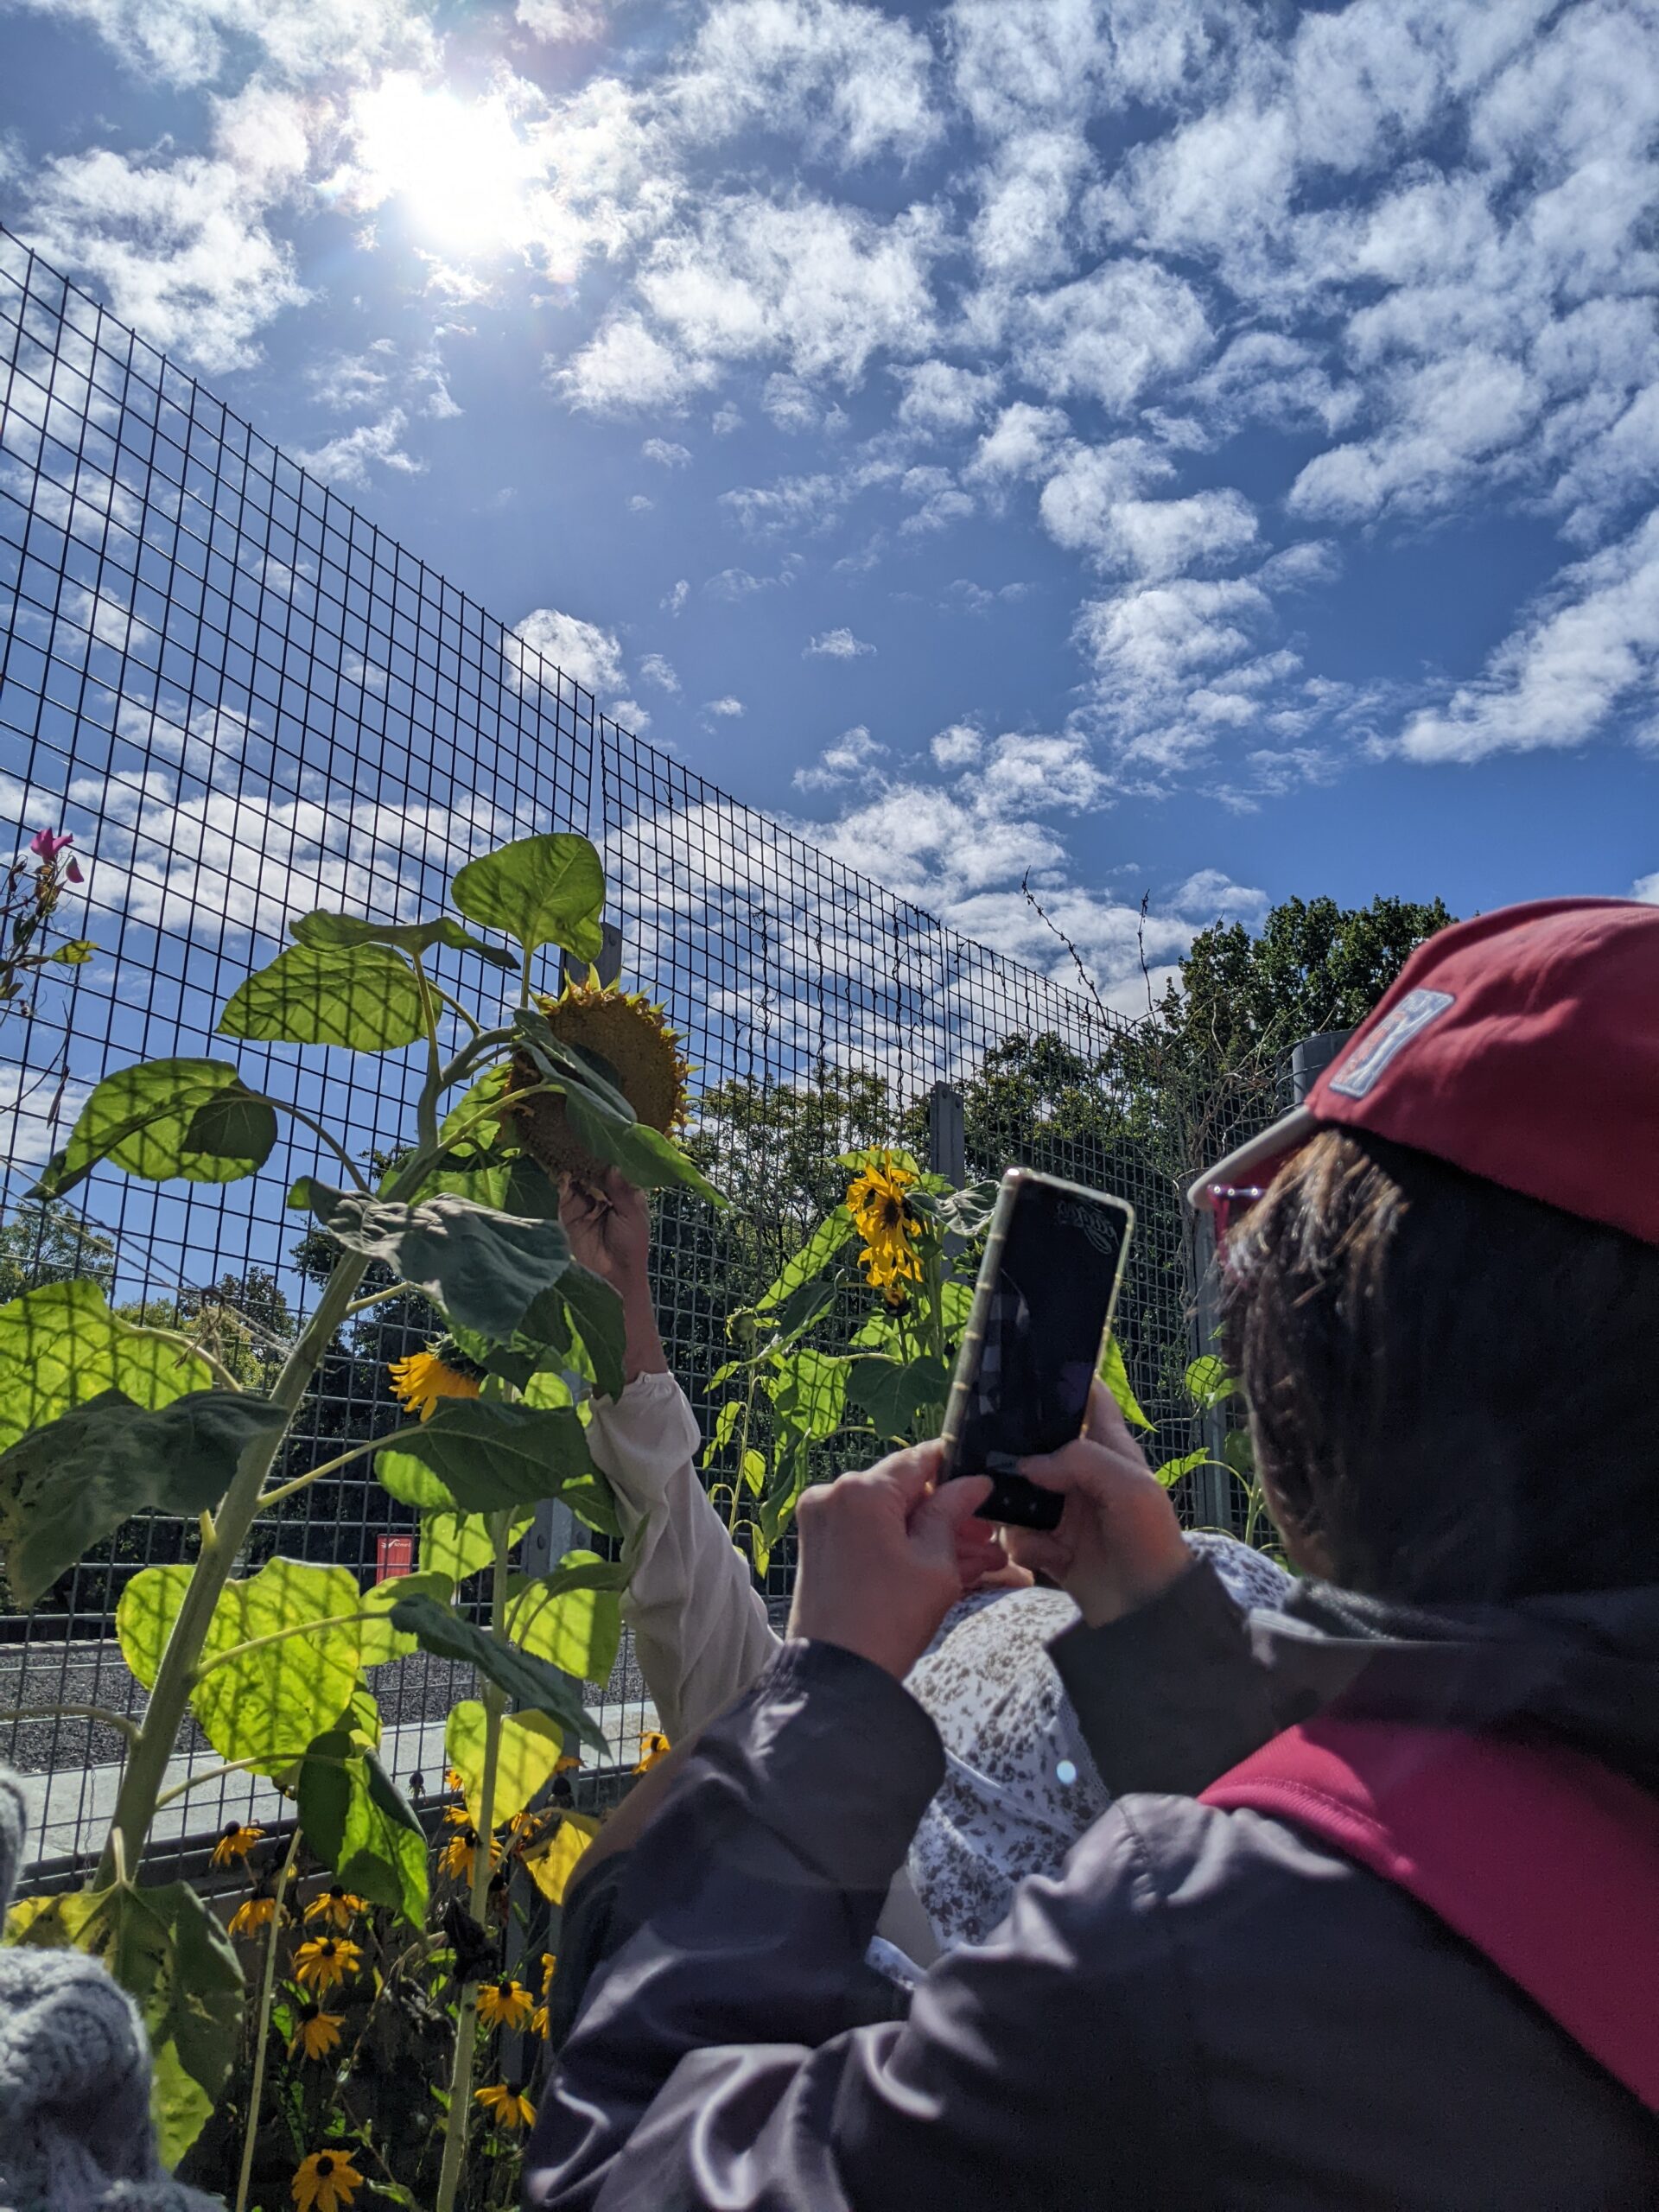 Short haired woman in red cap taking a photo of a sunflower against a blue sky